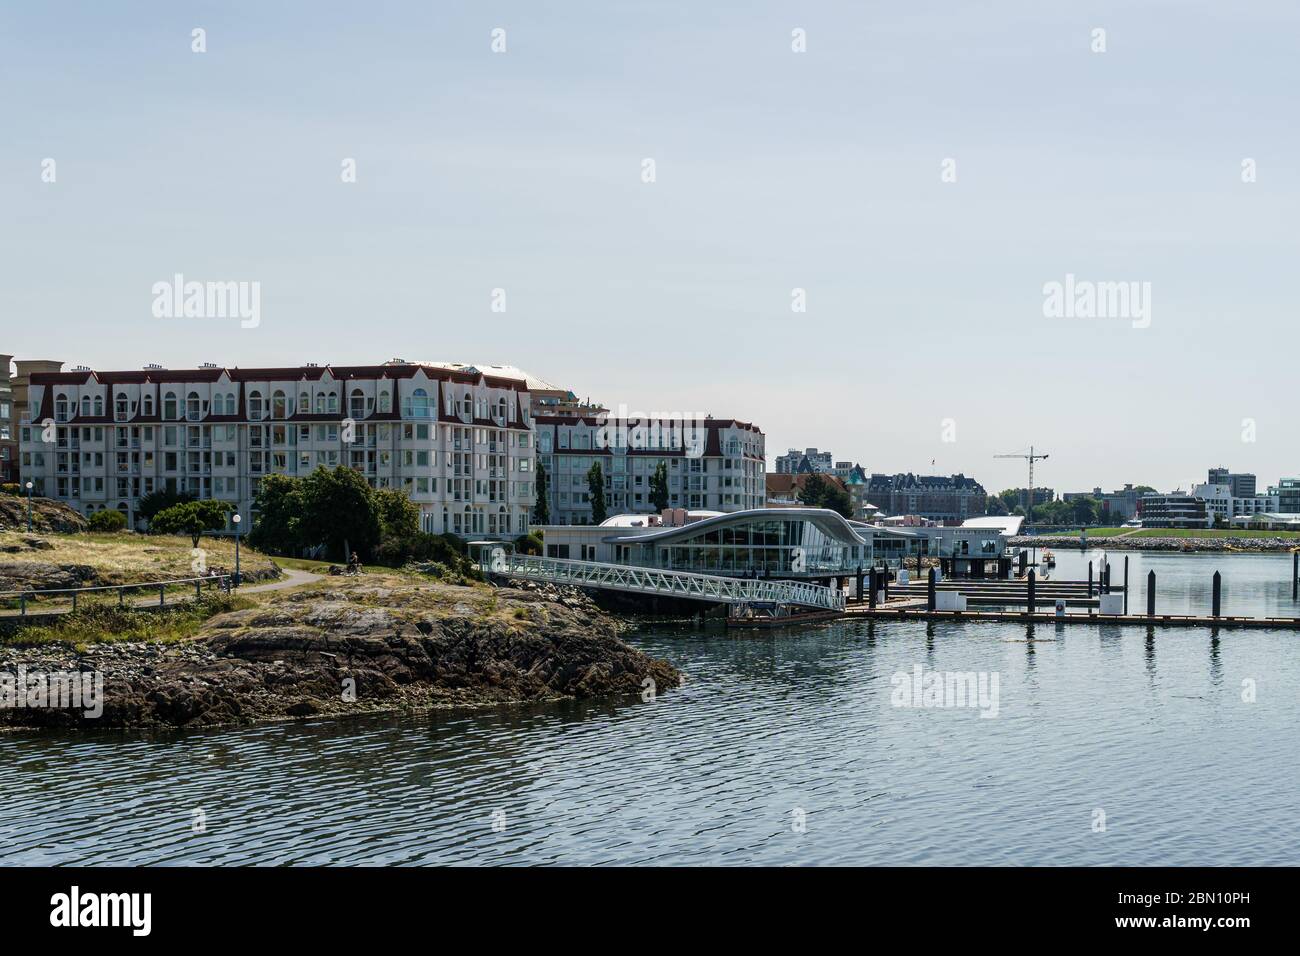 VICTORIA, CANADA - JULY 14, 2019: Boom plus Batten Restaurant and Cafe Tourists sightseeing destination Stock Photo